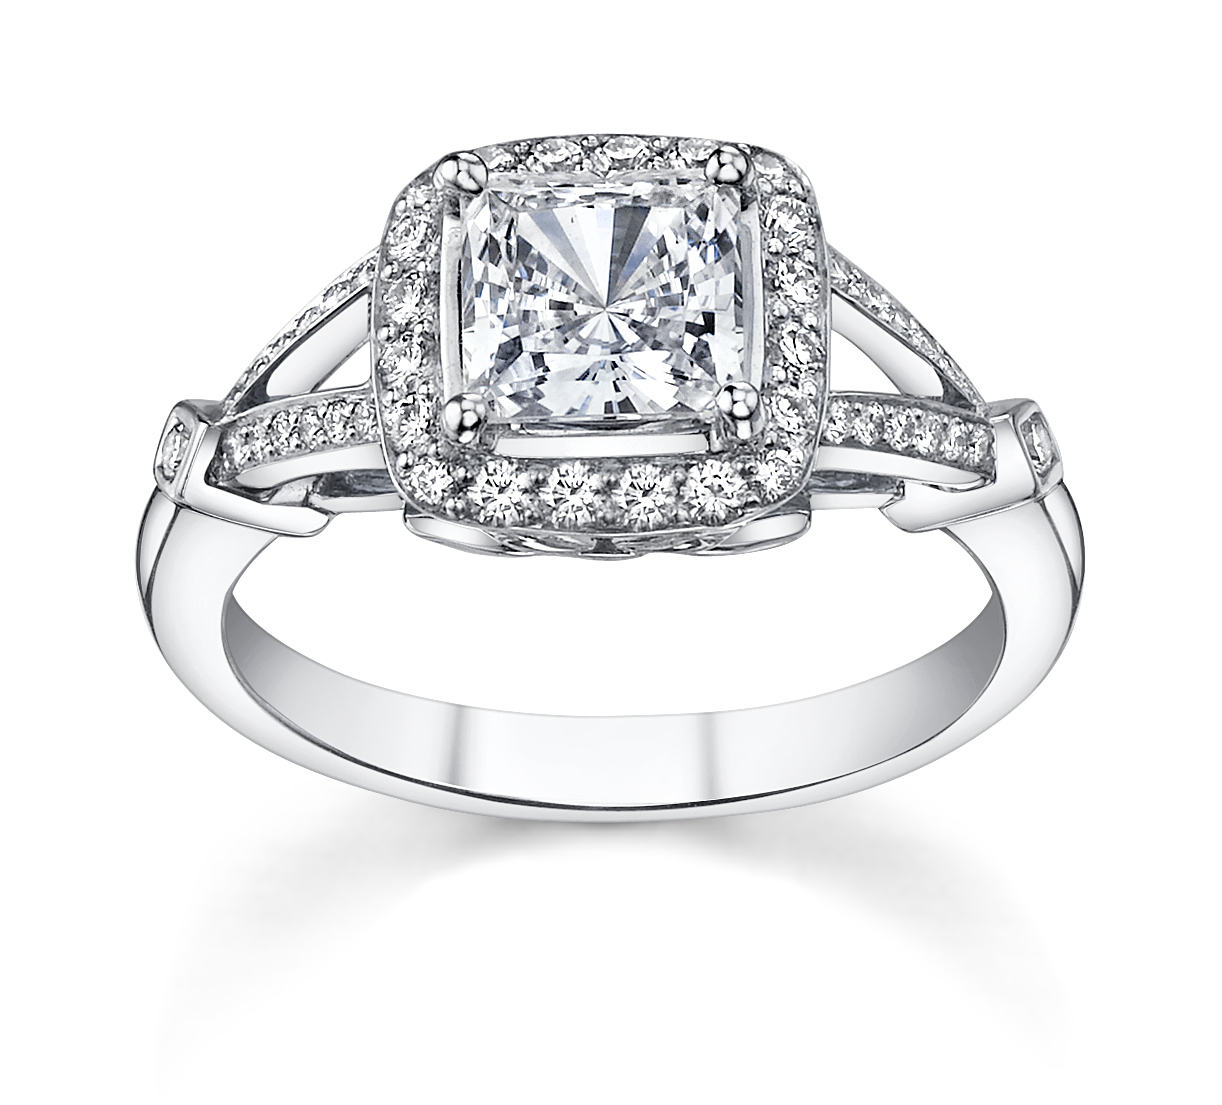 Robbins Brothers Picks Platinum Engagement Rings of the Day